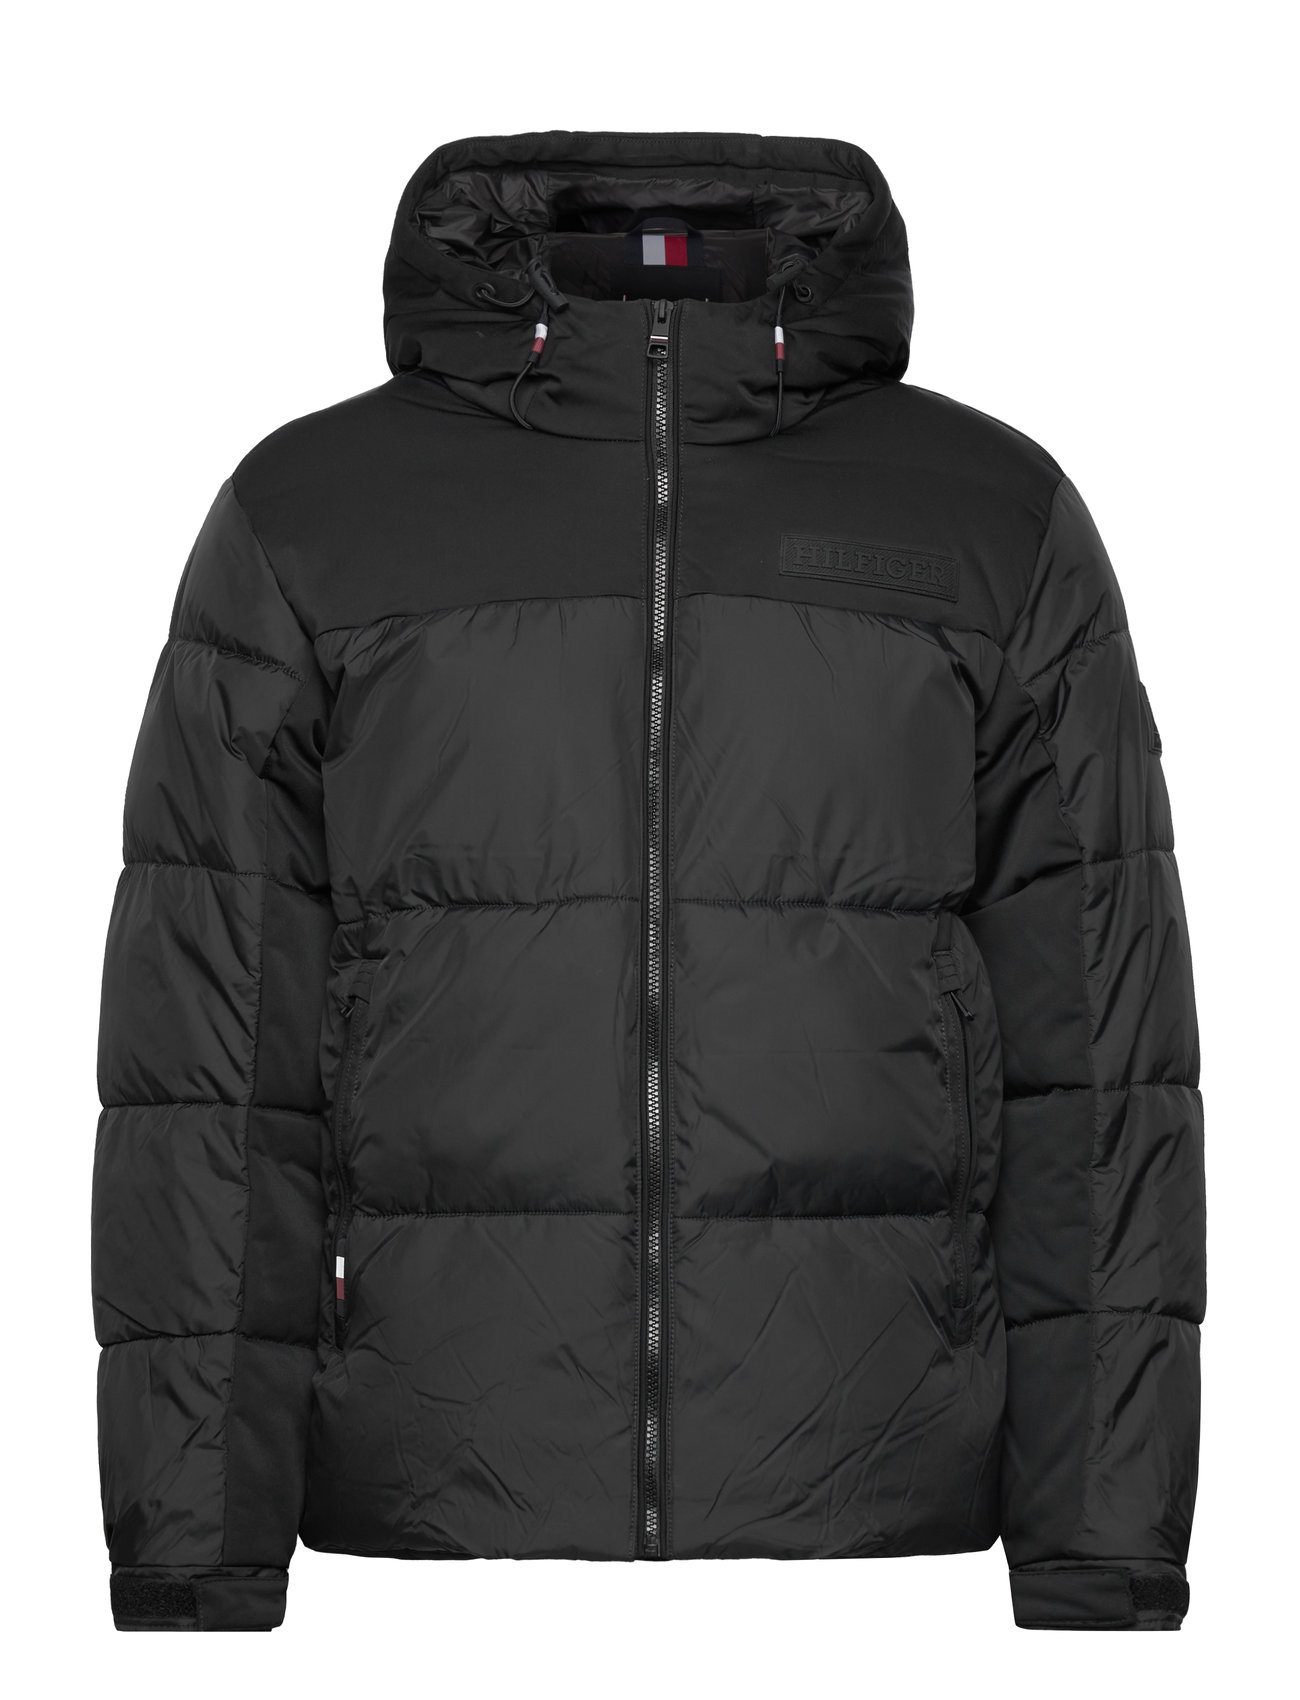 Tommy Hilfiger New York Hooded Jacket - 329.90 Buy jackets from Hilfiger online at Boozt.com. Fast delivery and easy returns